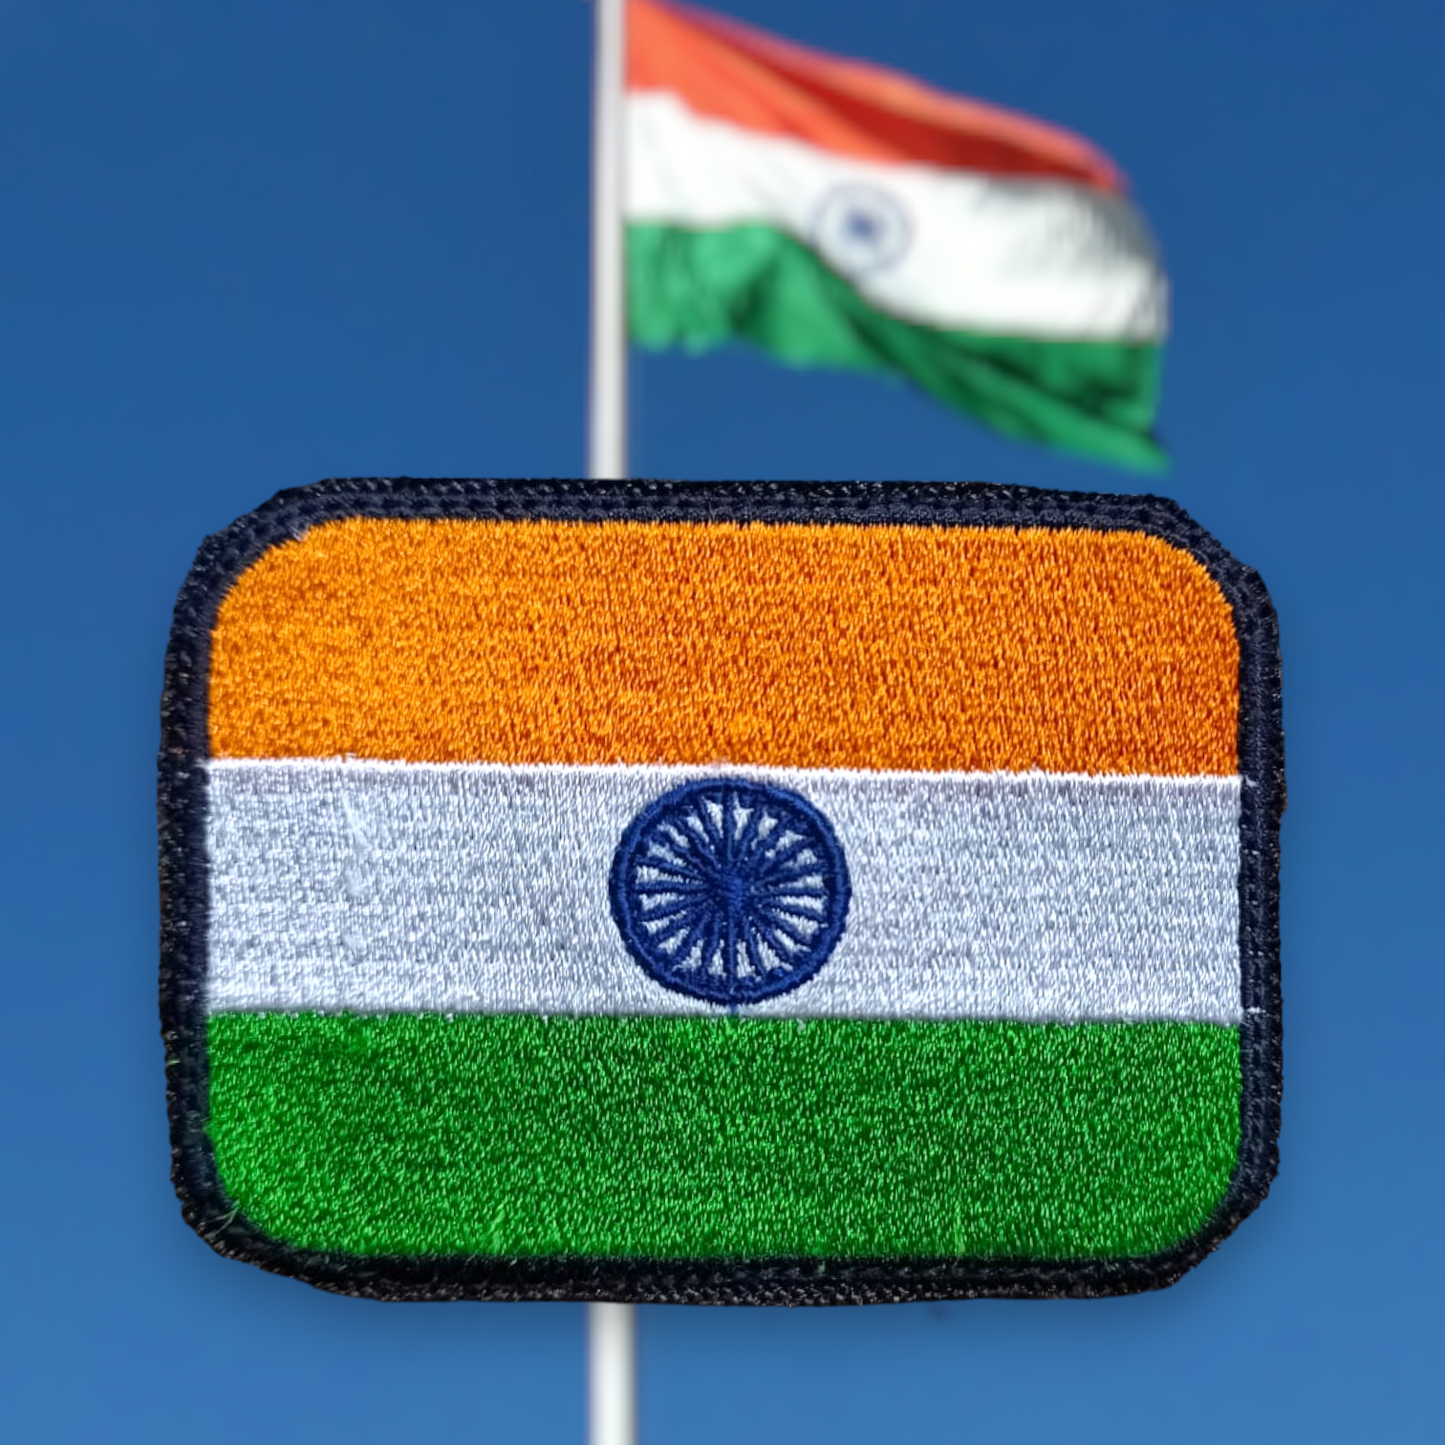 national flag rectangle patches for jackets